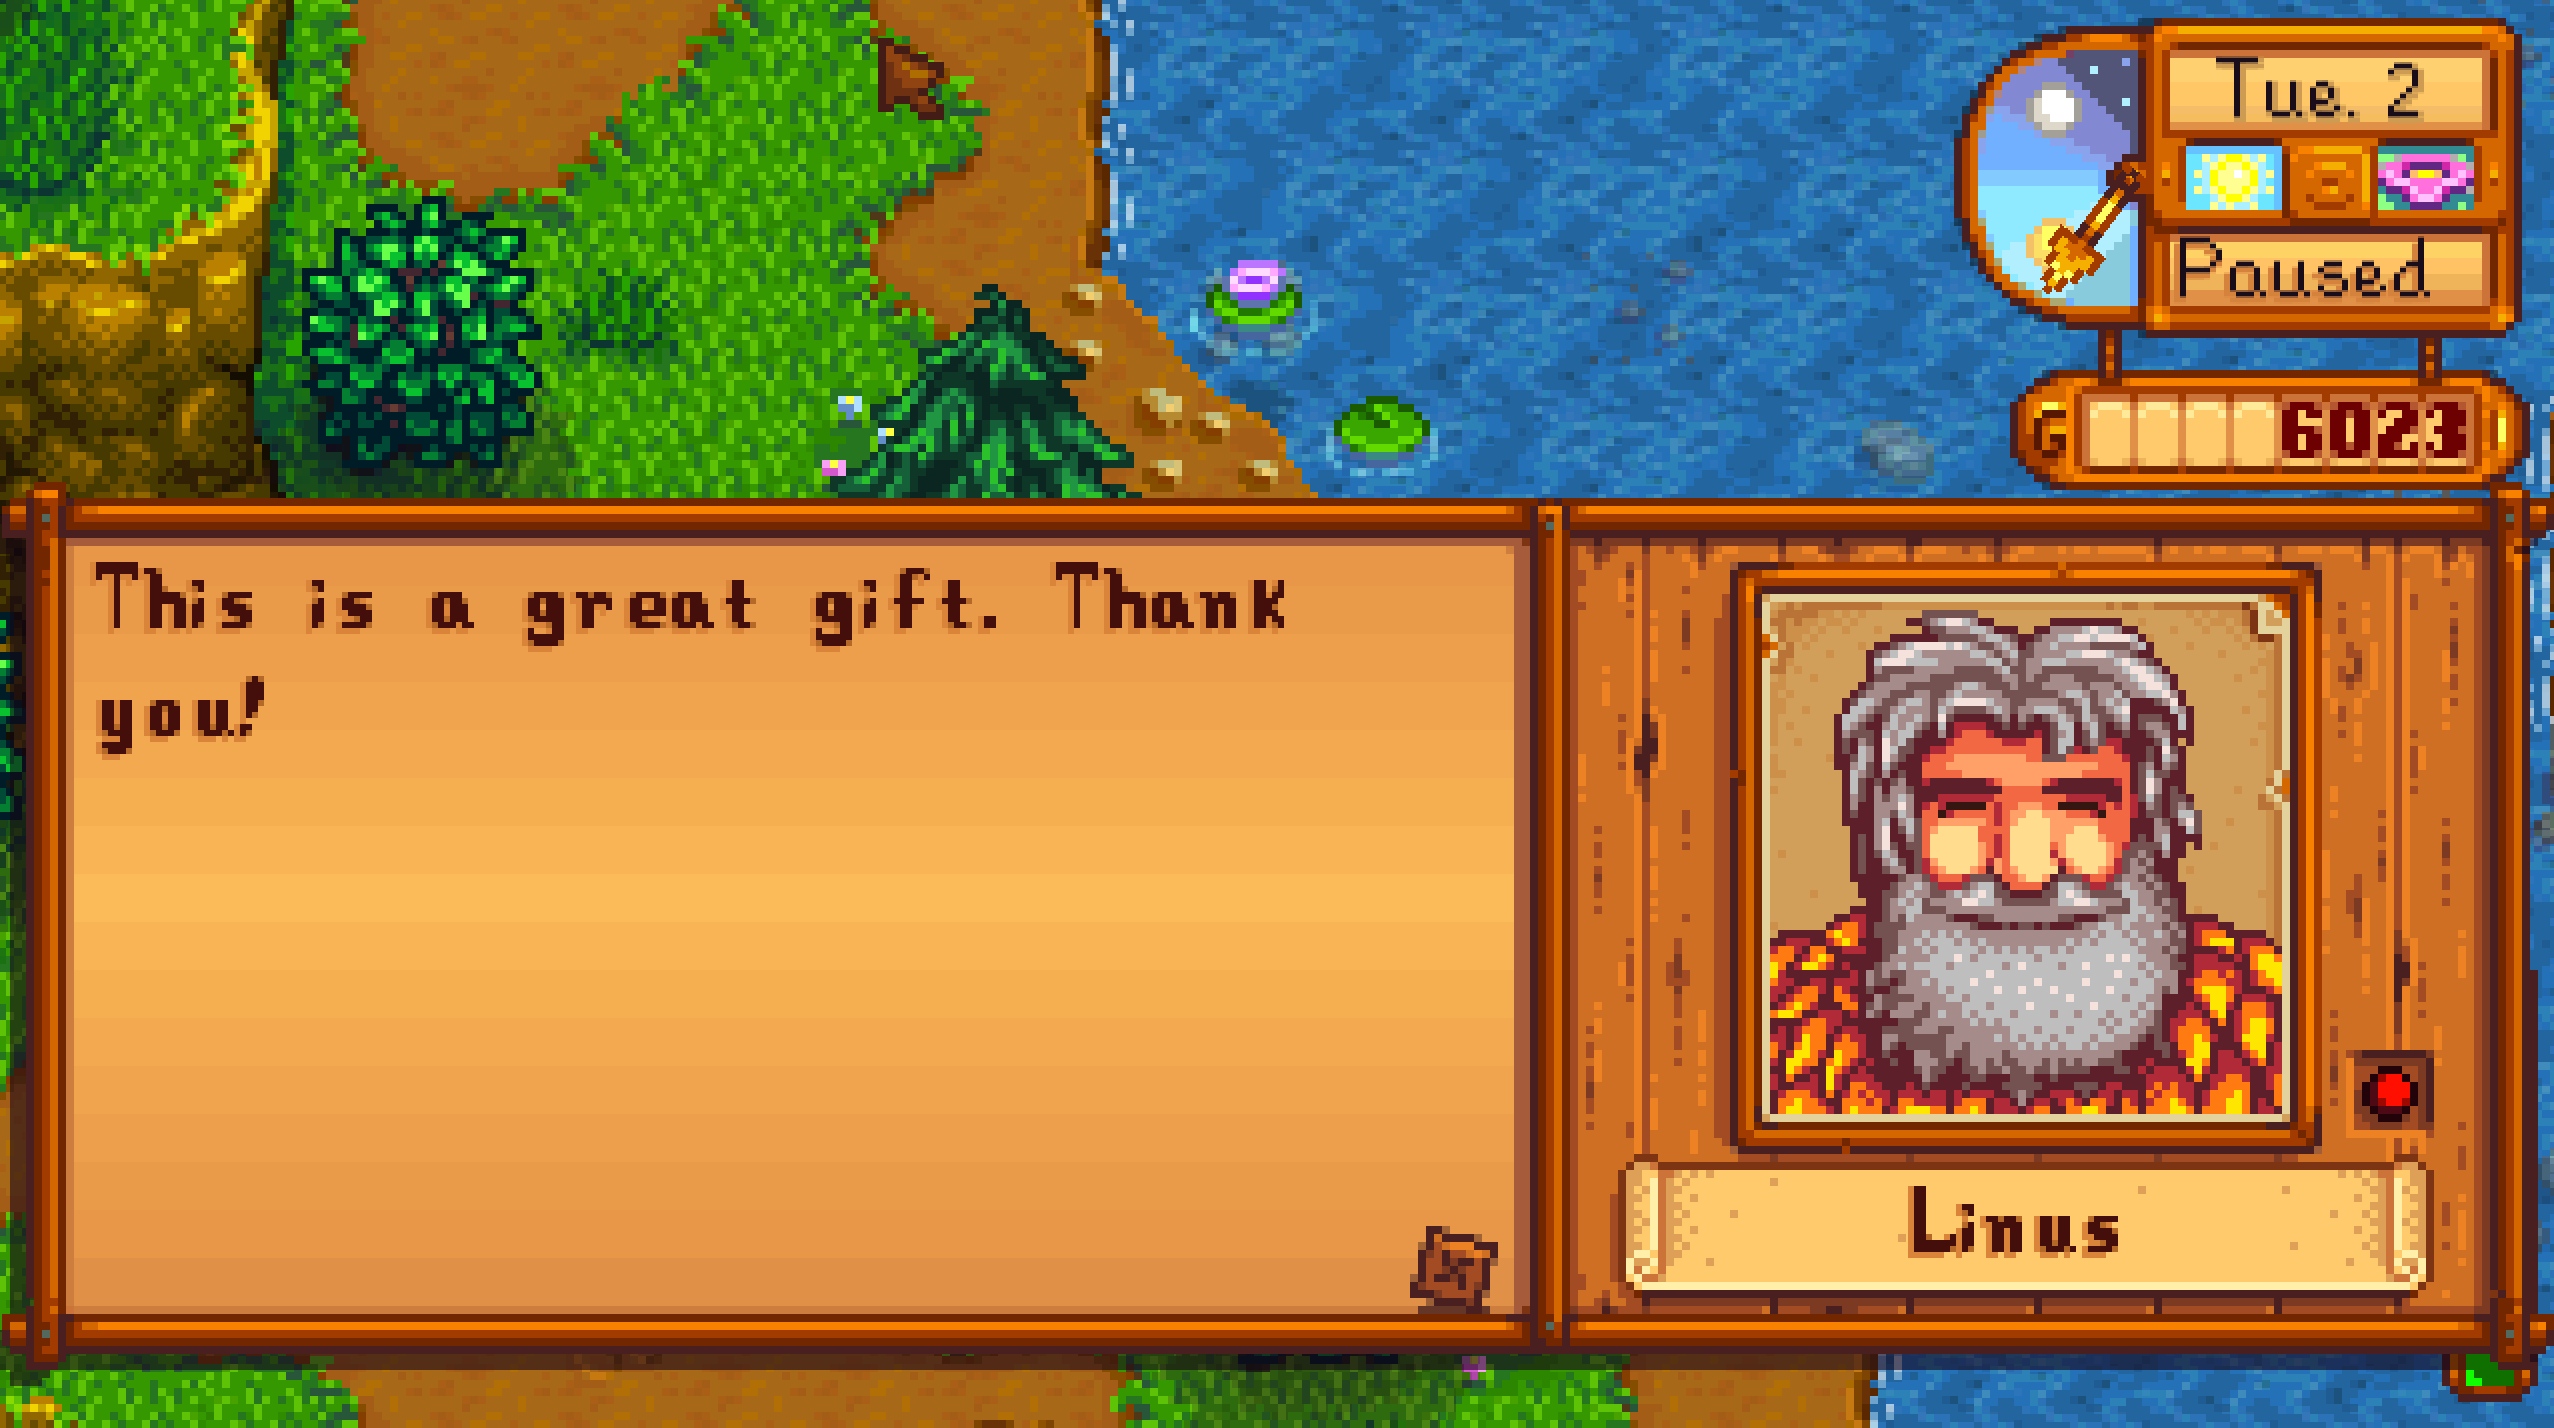 When in doubt, give Linus eggs!